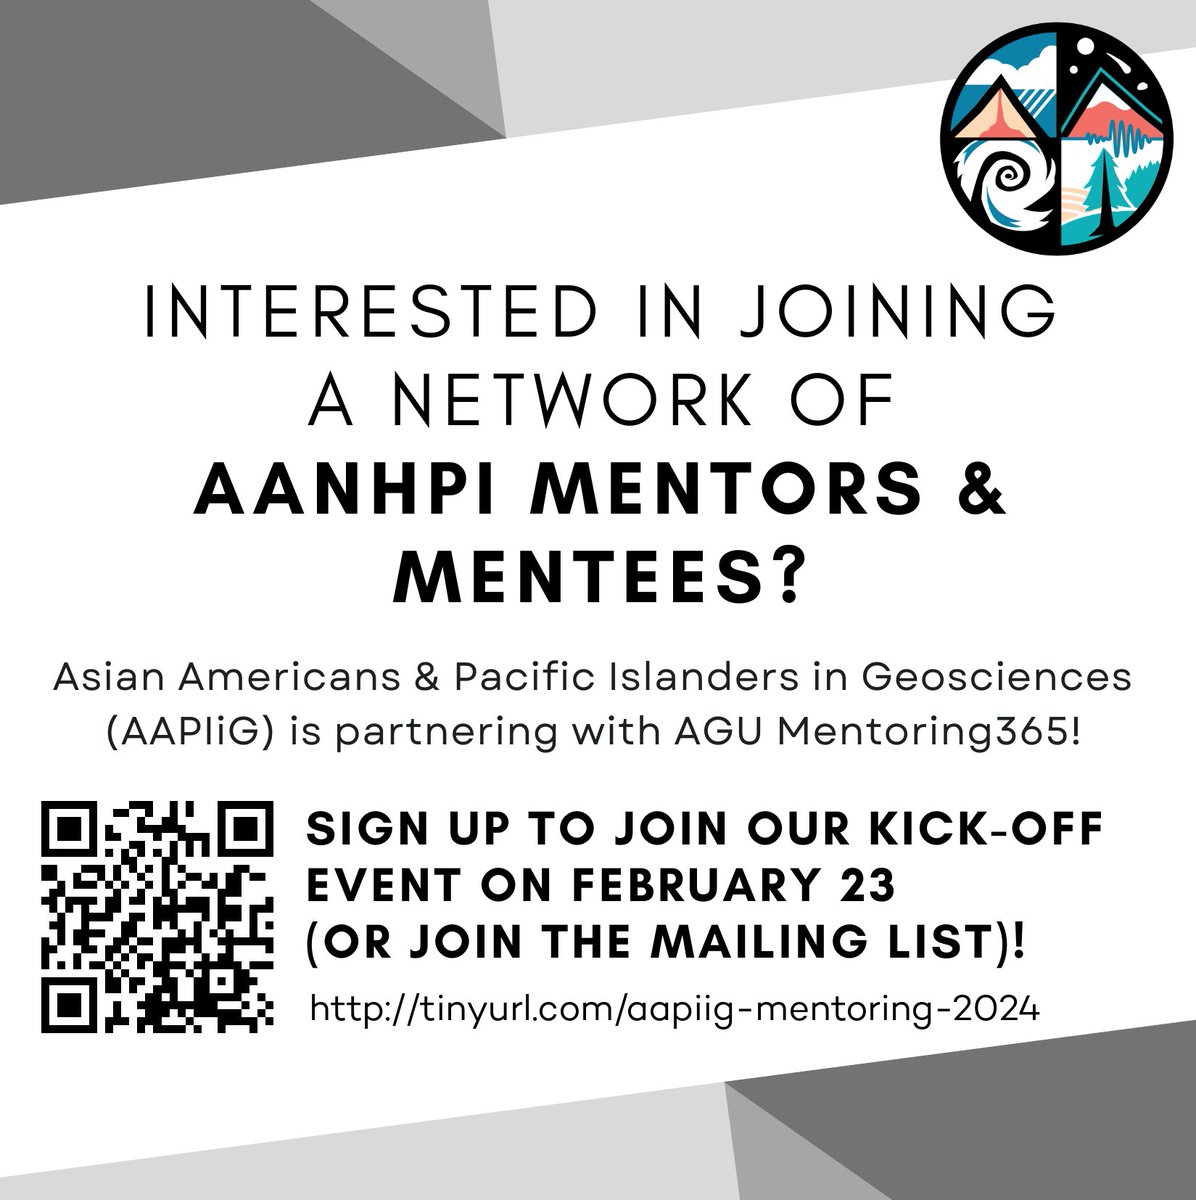 After 2 successful cycles of the AAPIiG Mentoring Pods Program, we are excited to share that AAPIiG has become an official partner of @theAGU Mentoring365! ‼️ Join us for our Mentoring Program 2024 Kick-Off Event on Fri, Feb 23 at 10 am PT/ 1 pm ET tinyurl.com/aapiig-mentori…